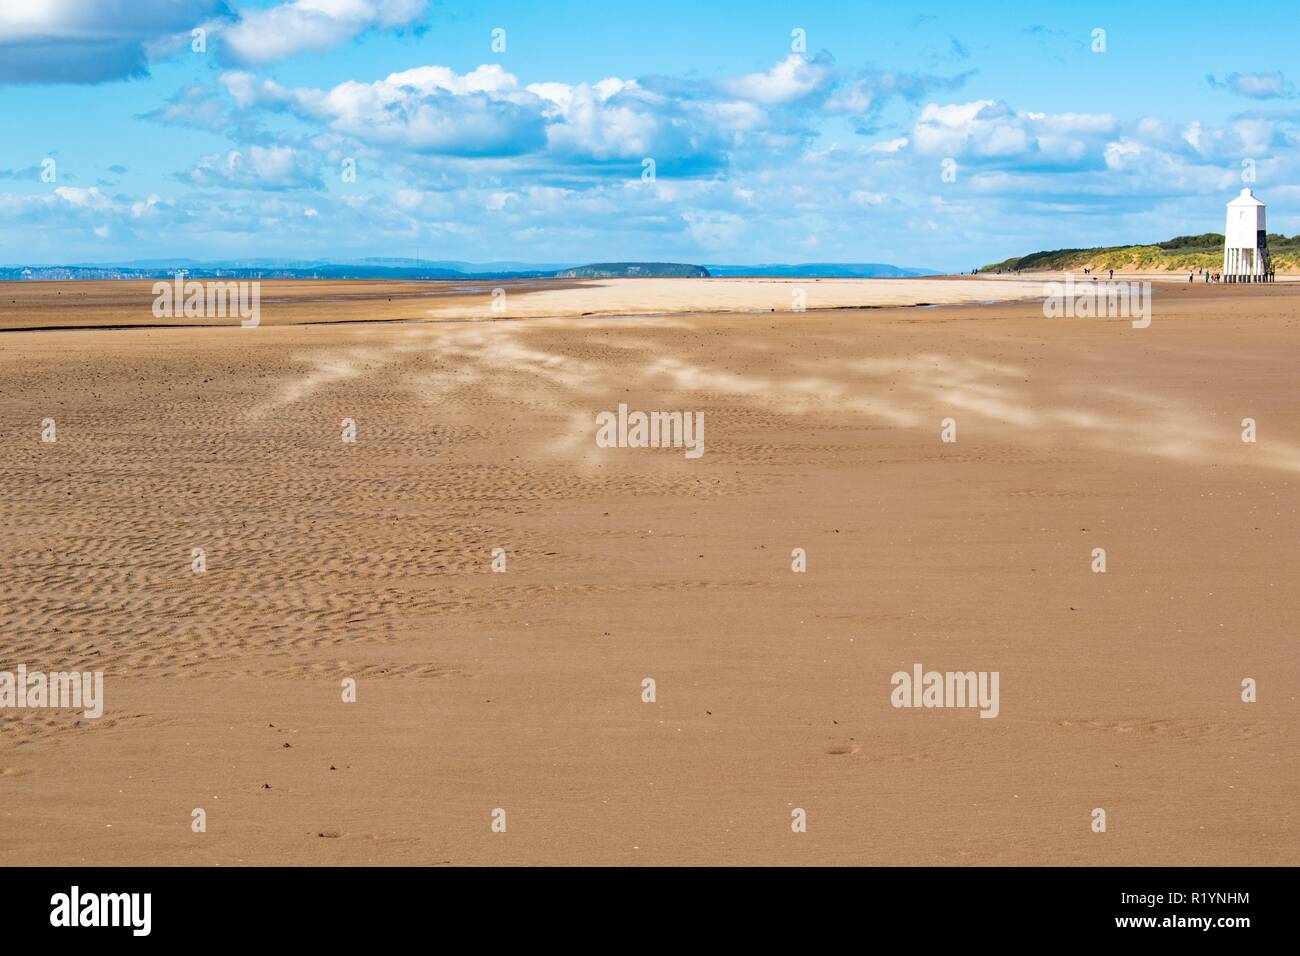 Prints in the sand on a beach Stock Photo - Alamy